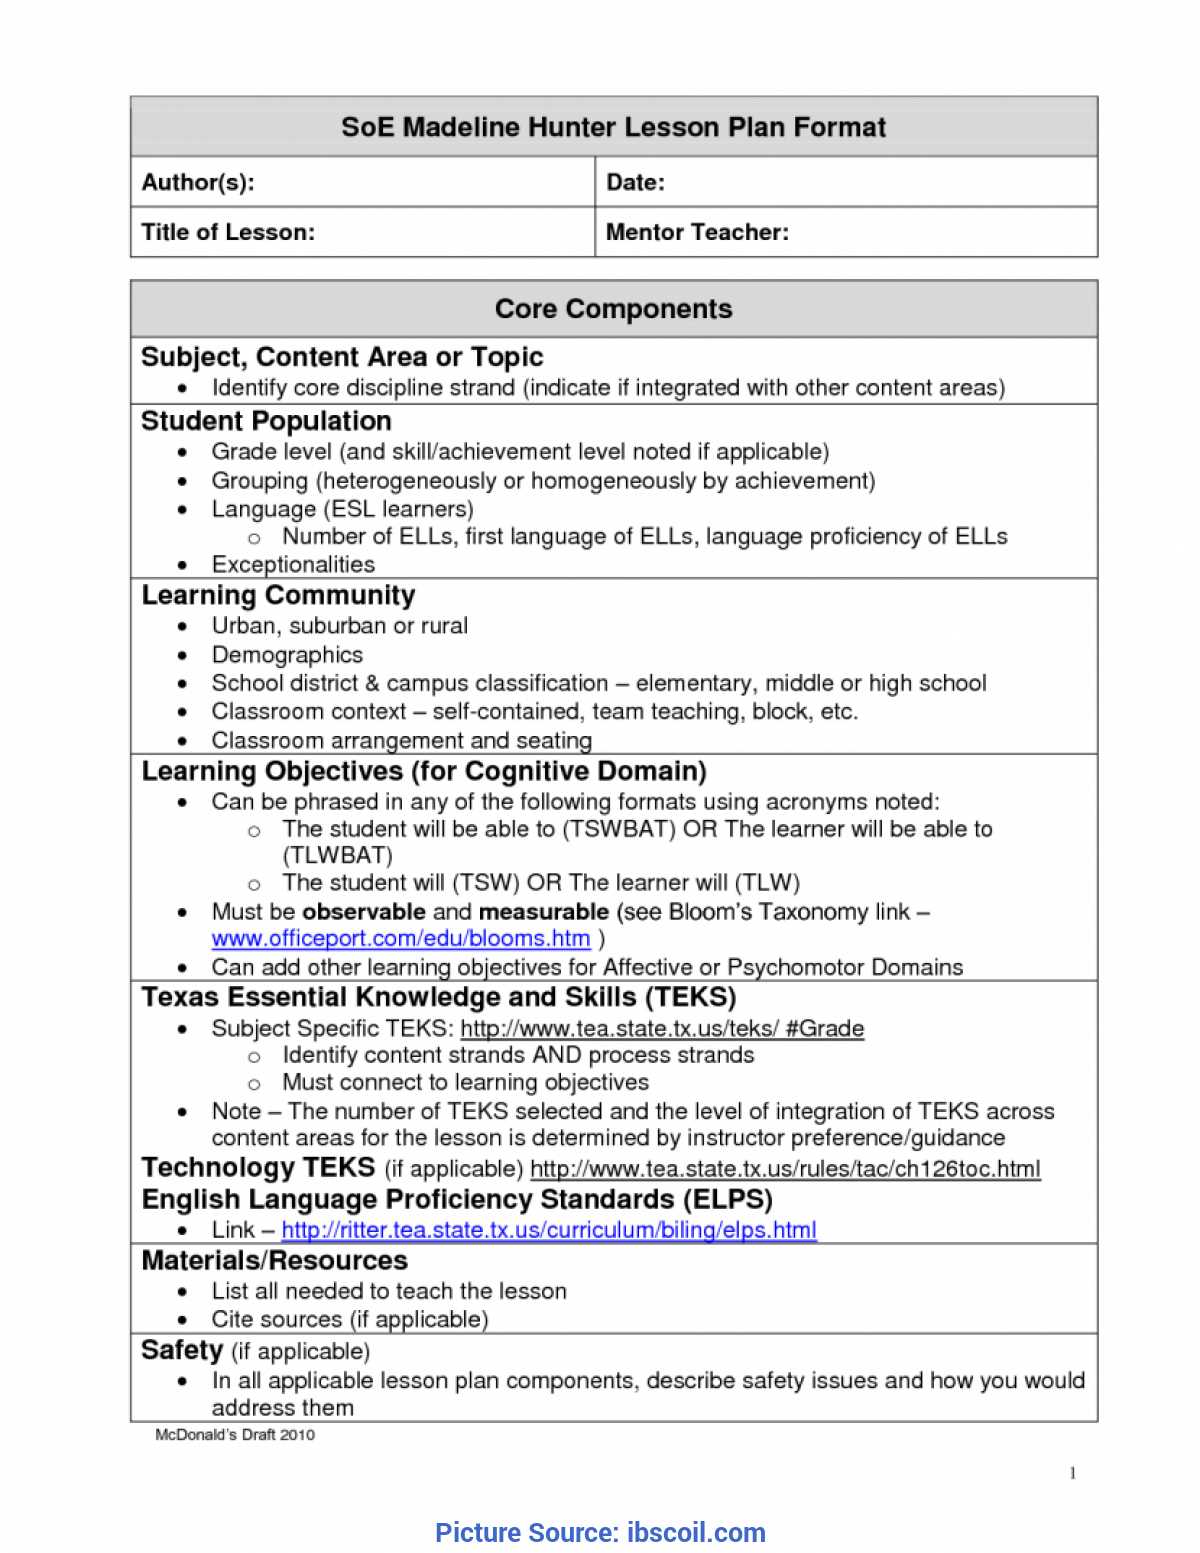 Madeline Hunter Lesson Plan Template Twiroo Com | Lesso With Regard To Madeline Hunter Lesson Plan Template Word